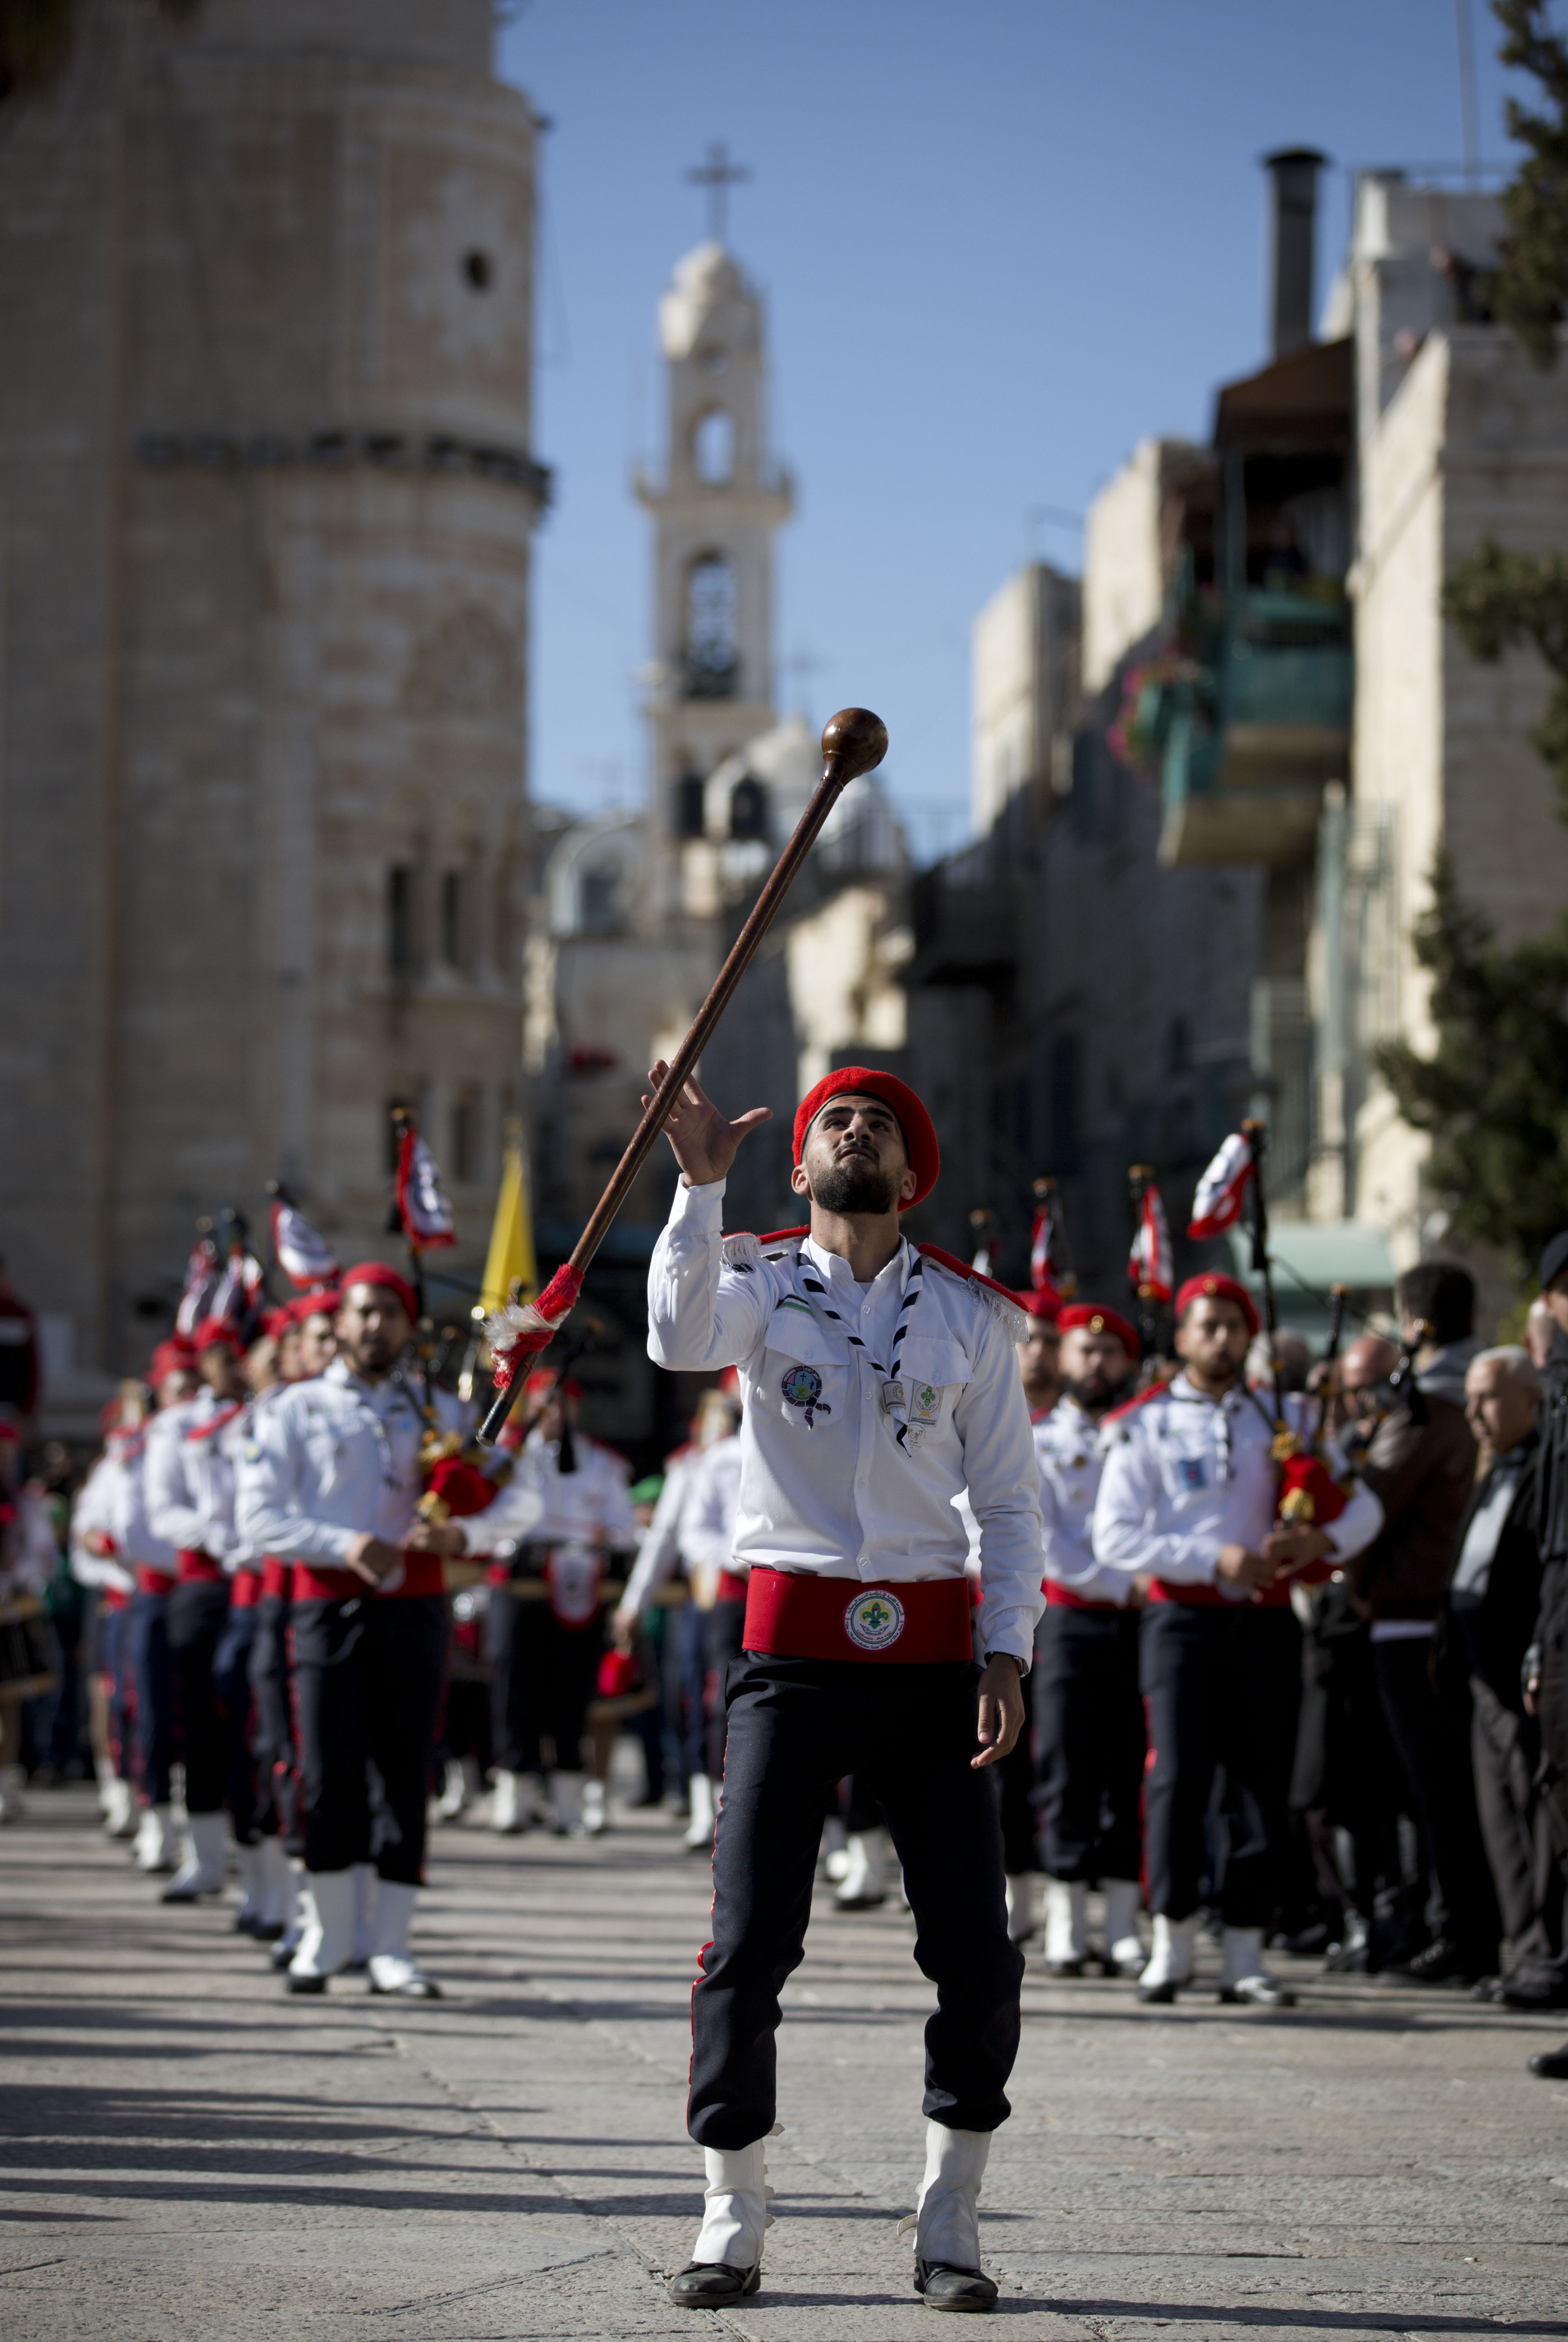 A Palestinian Scout marching band parade during Christmas celebrations outside the Church of the Nativity, built atop the site where Christians believe Jesus Christ was born, on Christmas Eve, in the West Bank City of Bethlehem, Tuesday, Dec. 24, 2019. (AP Photo/Majdi Mohammed)